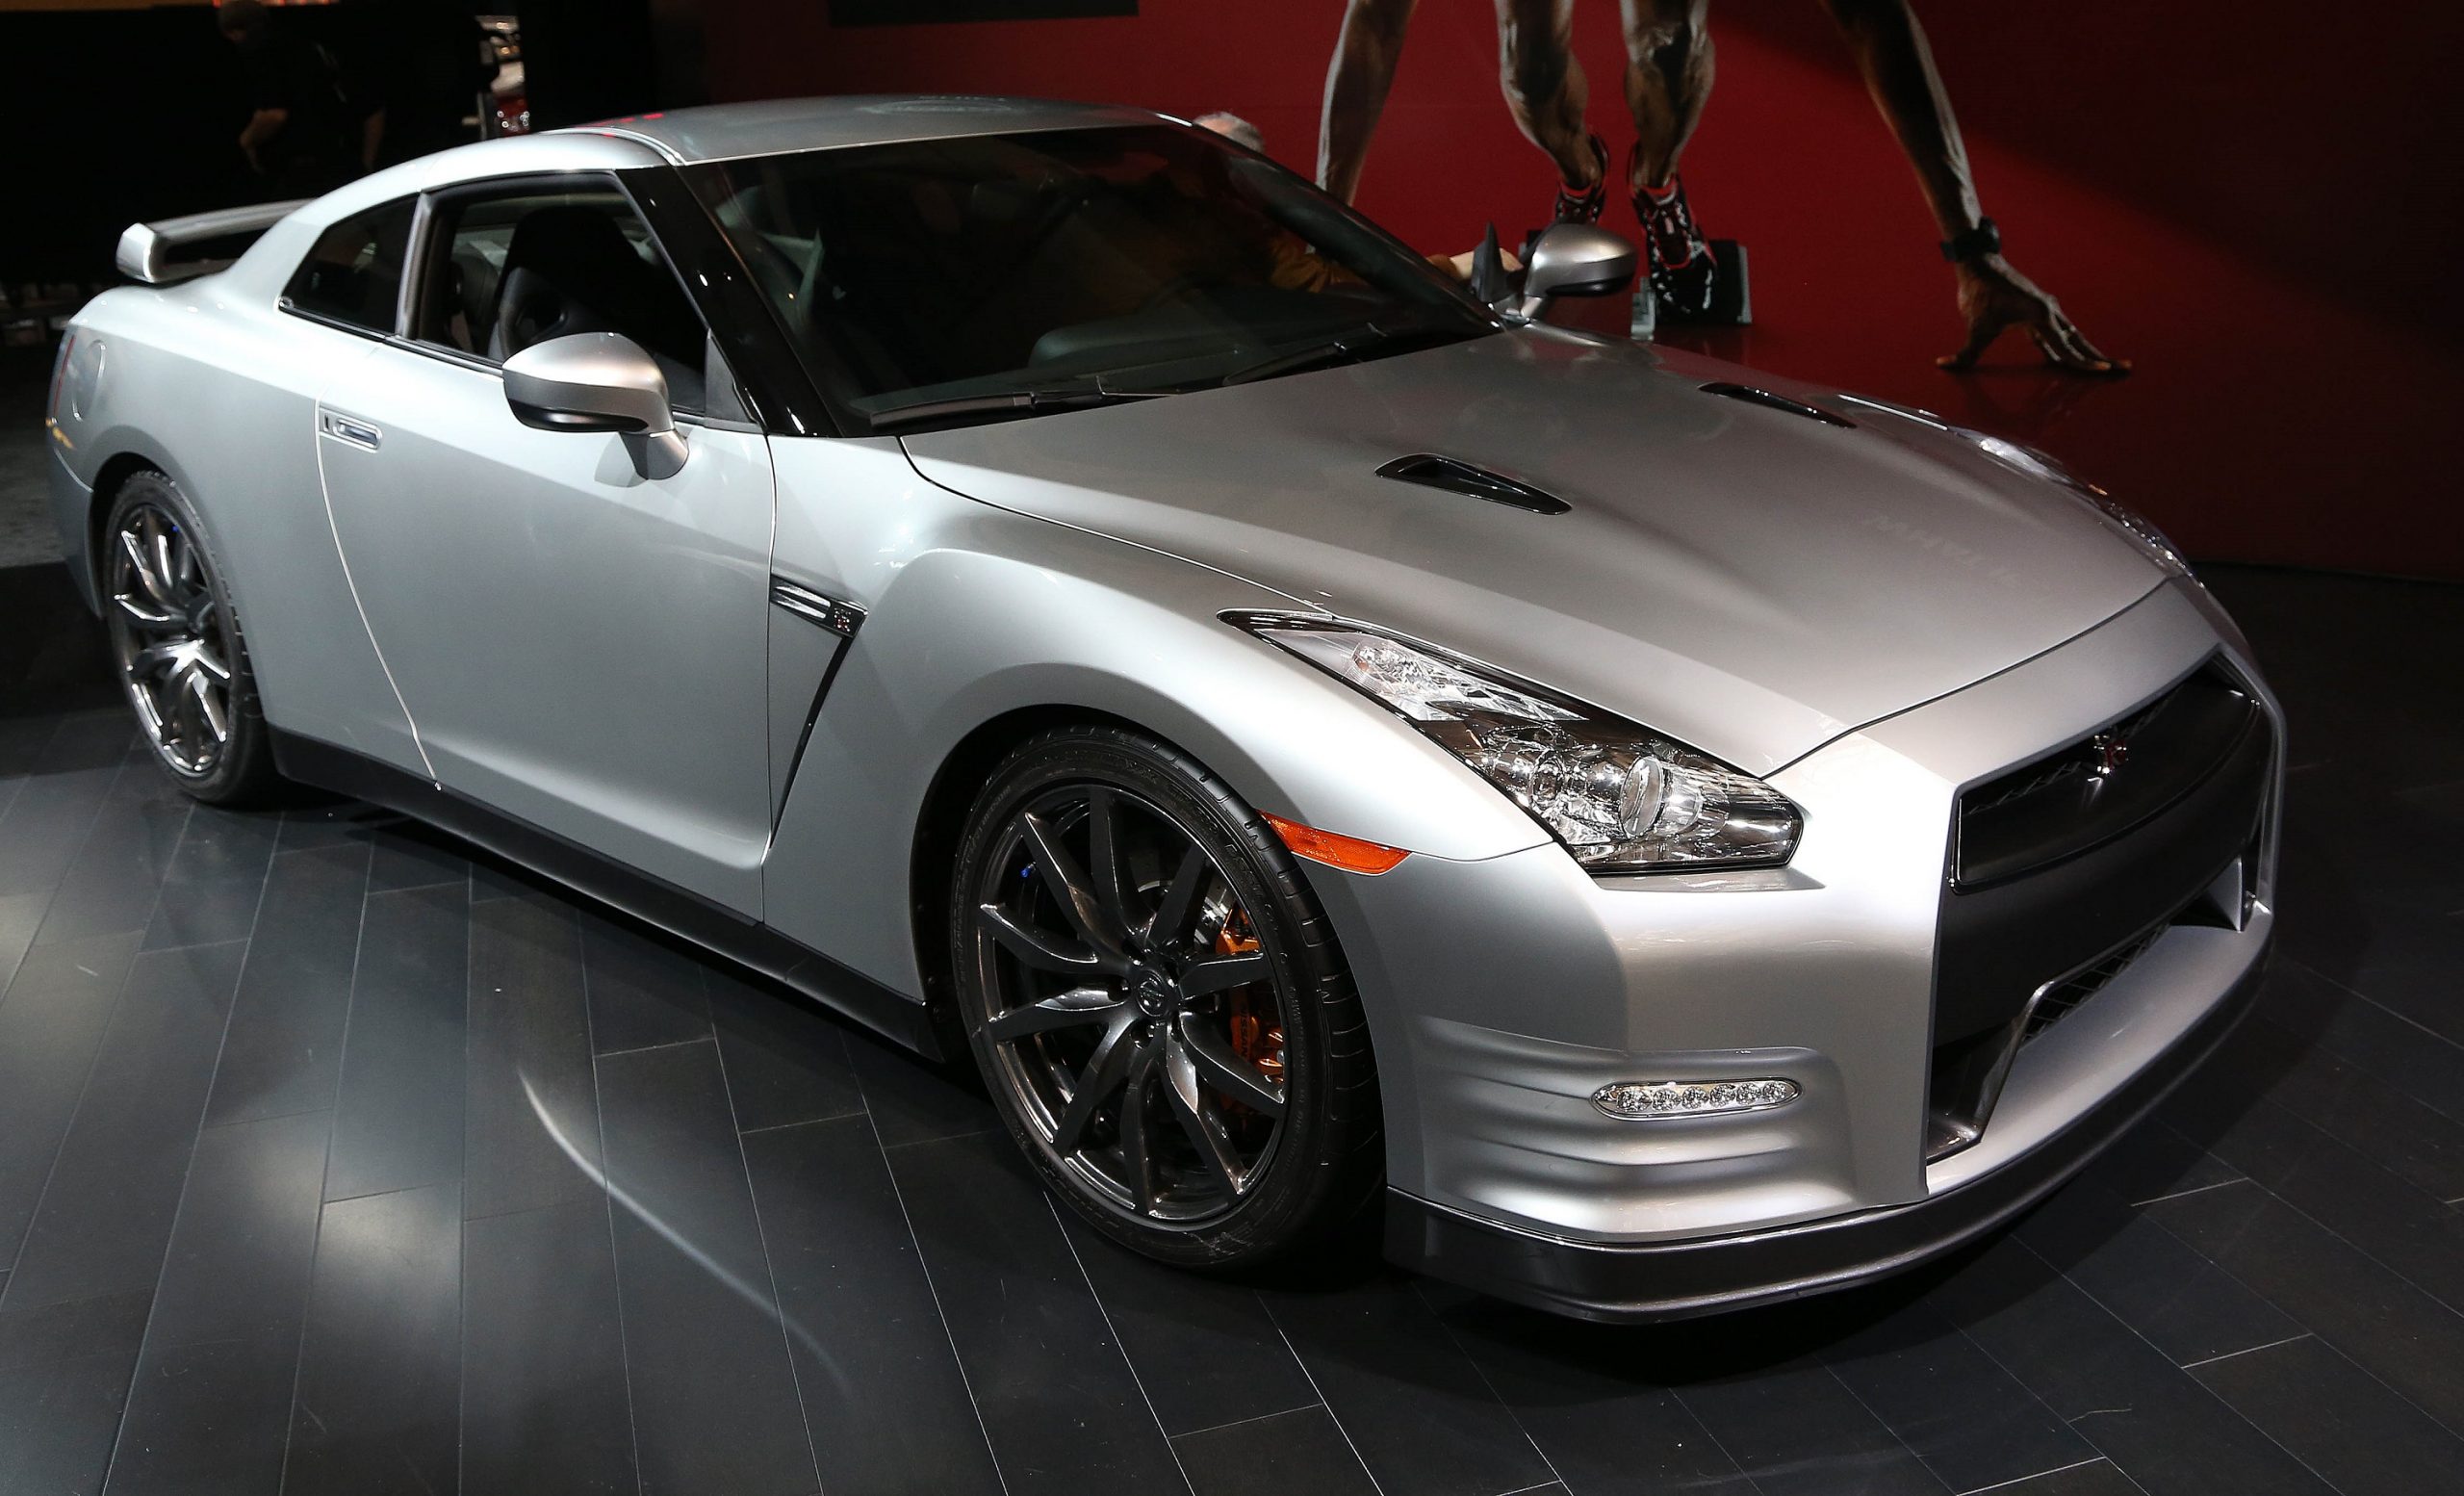 A silver Nissan GT-R shot from the high 3/4 angle at an auto show